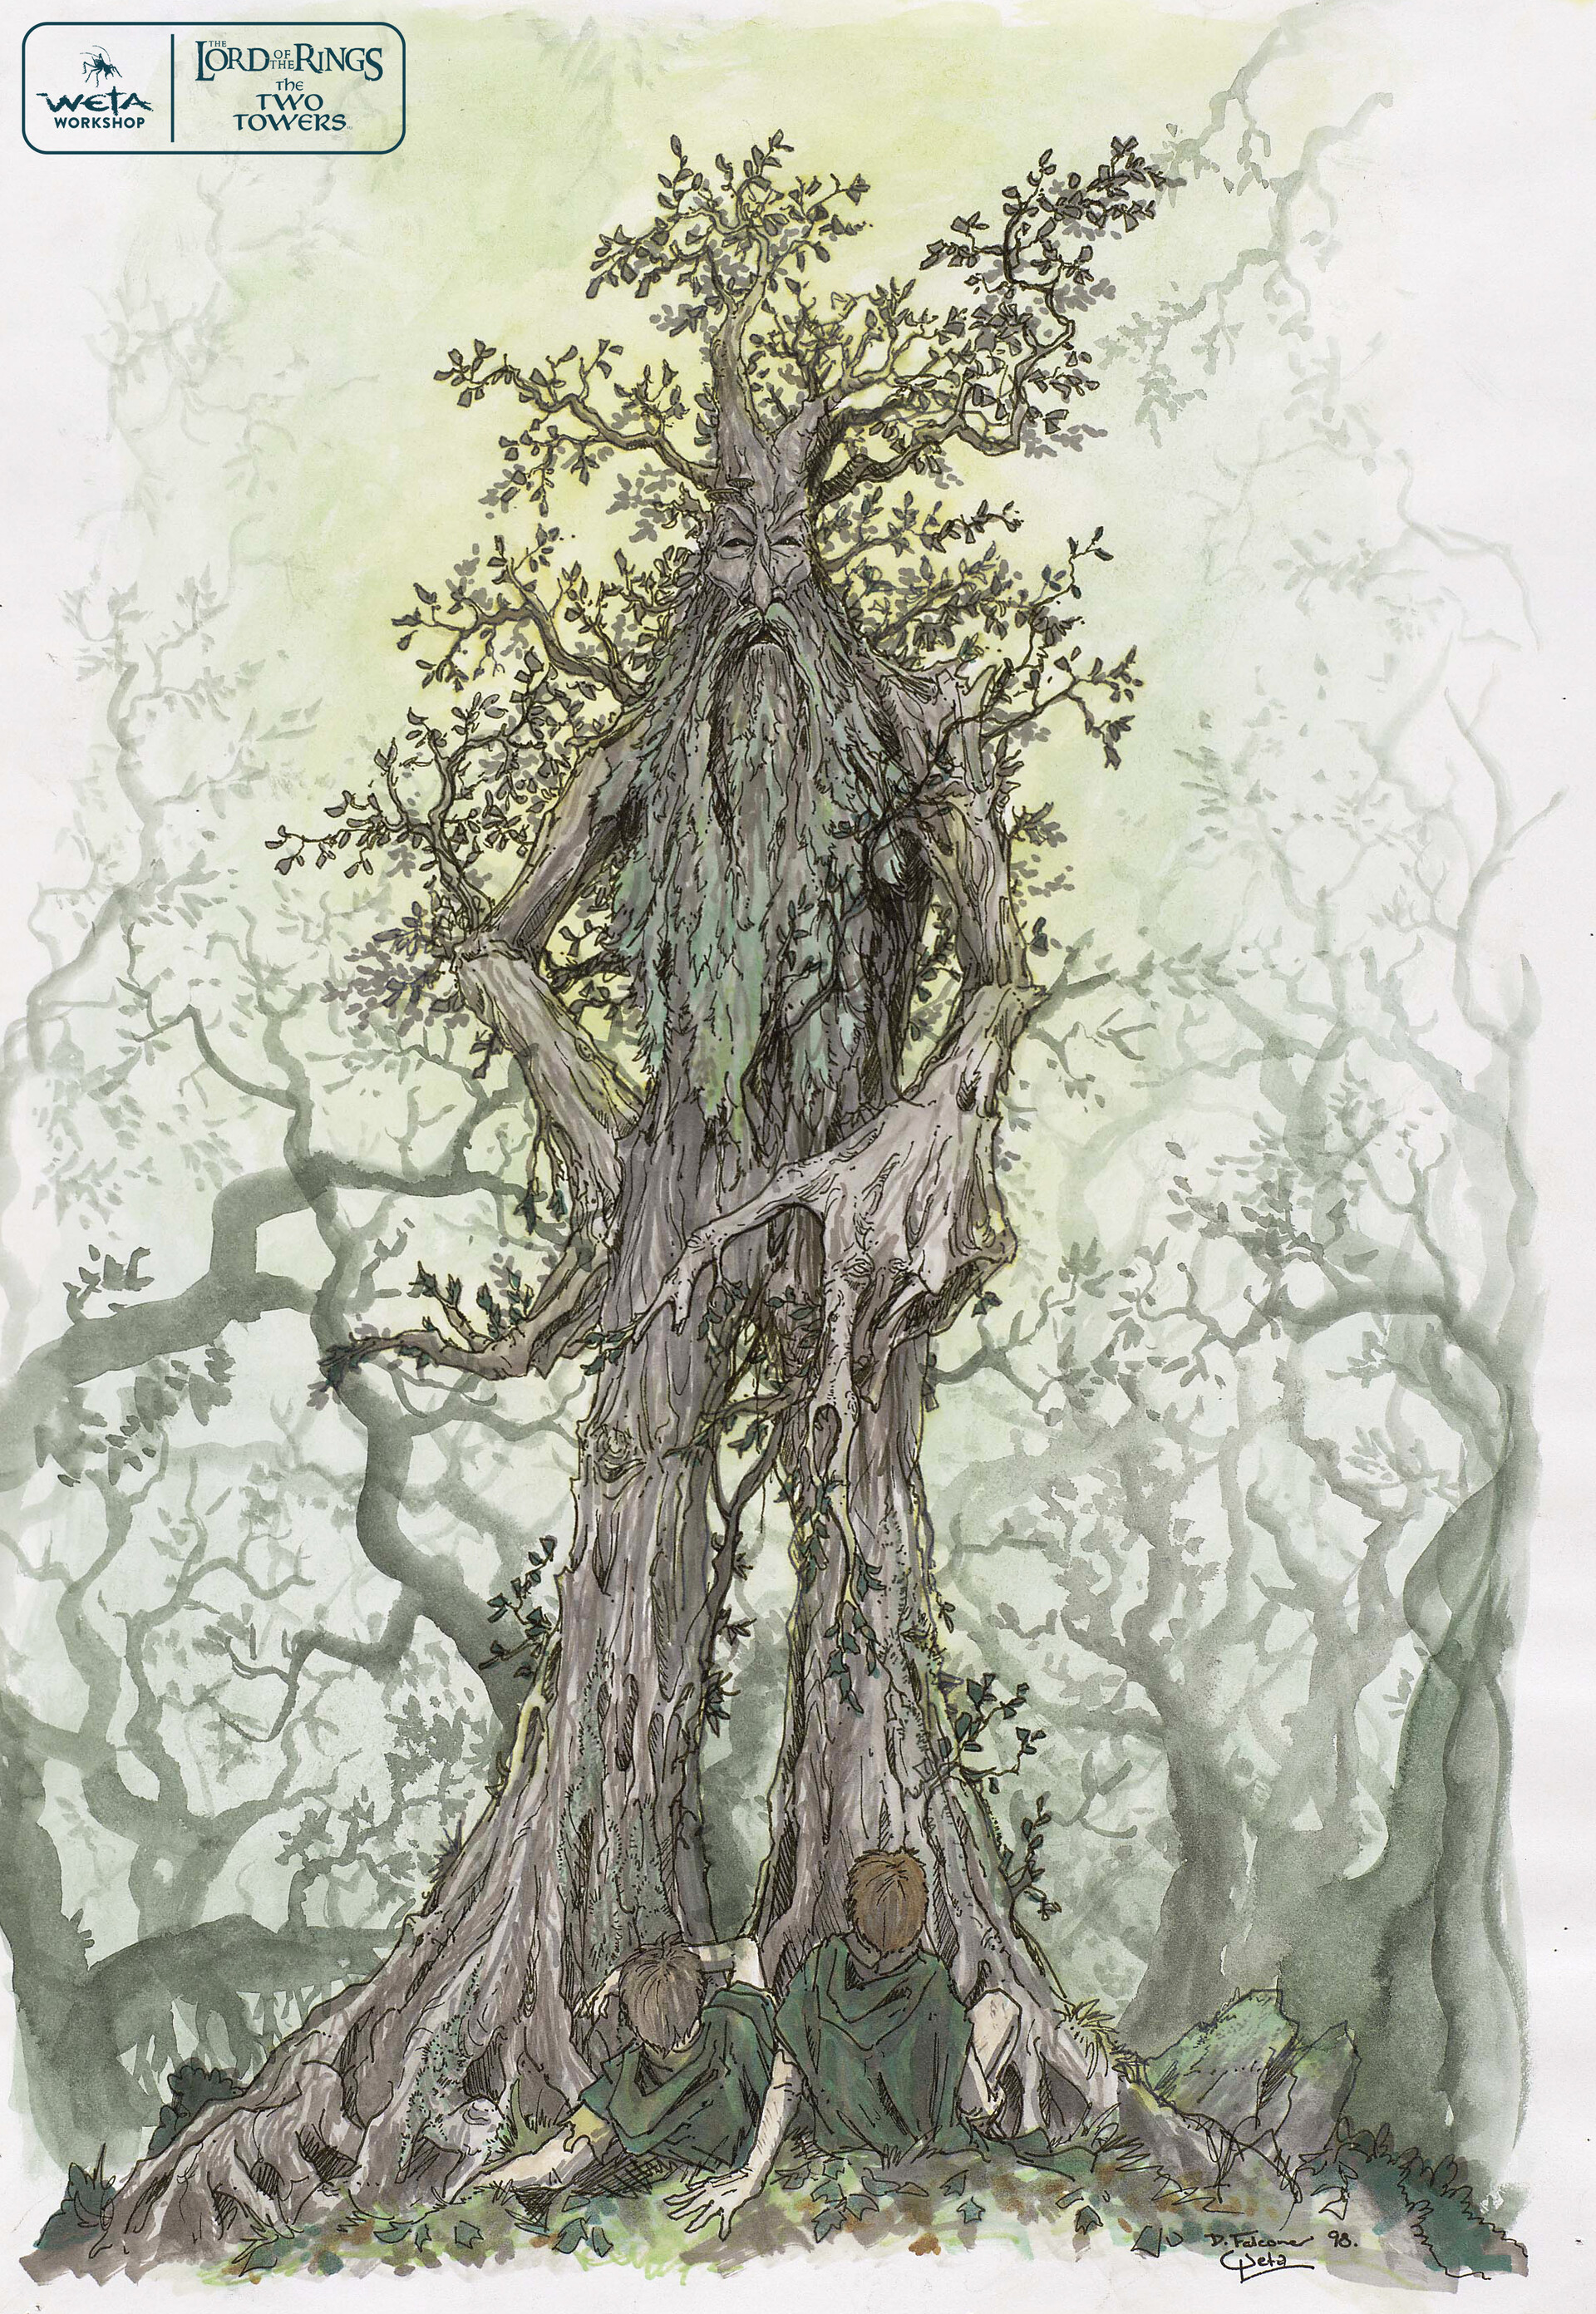 Were all the Ents older than Elves or was it only Treebeard? - Quora